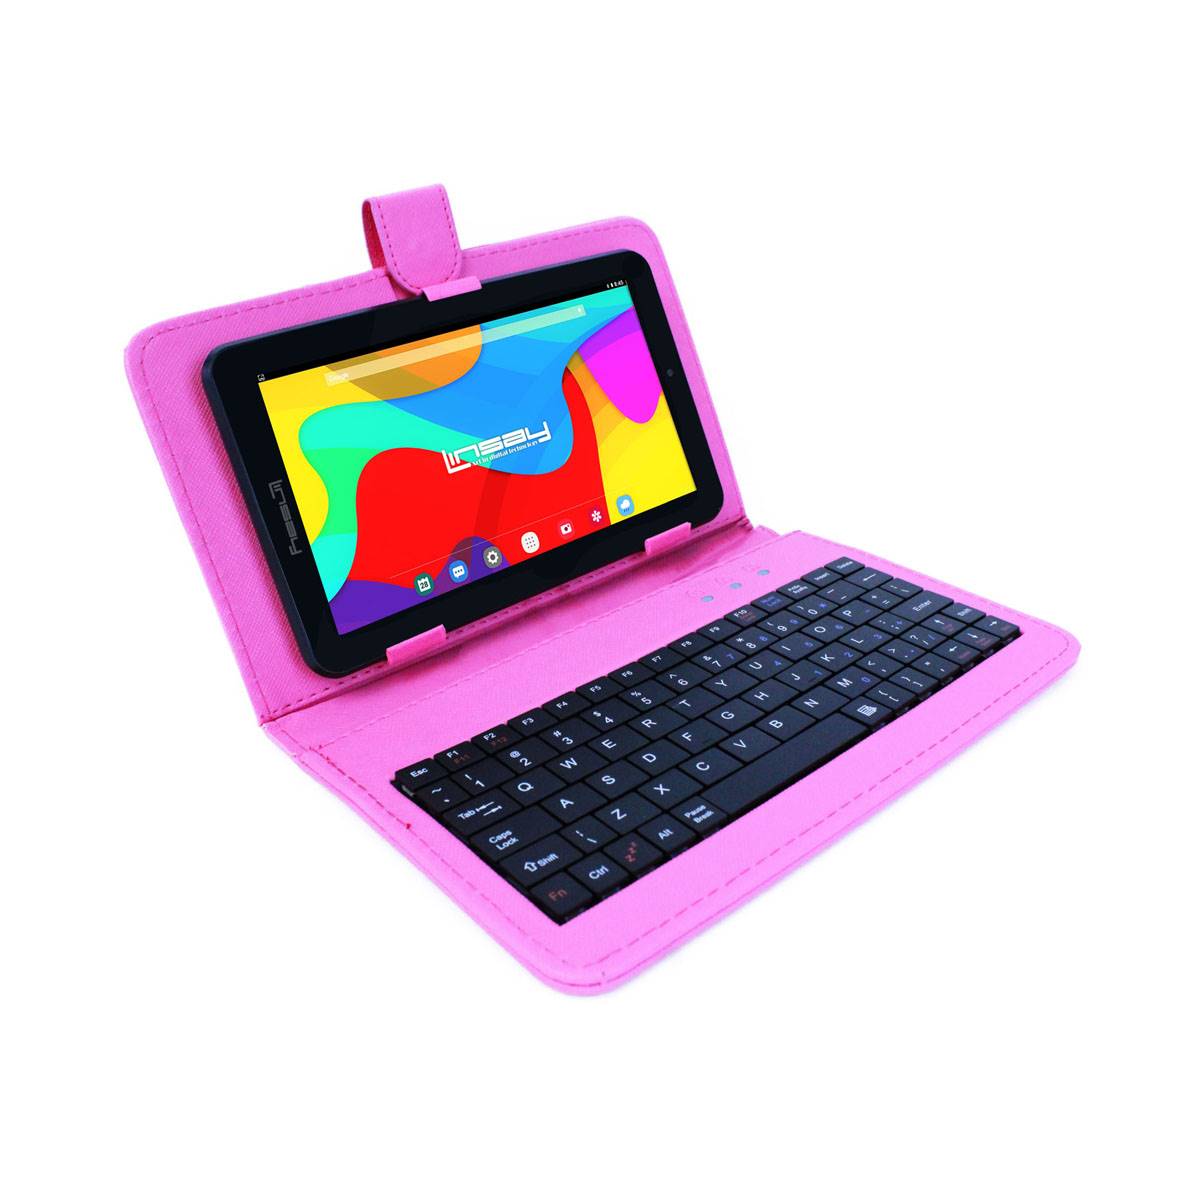 Linsay 7in. Quad Core Tablet With Leather Keyboard